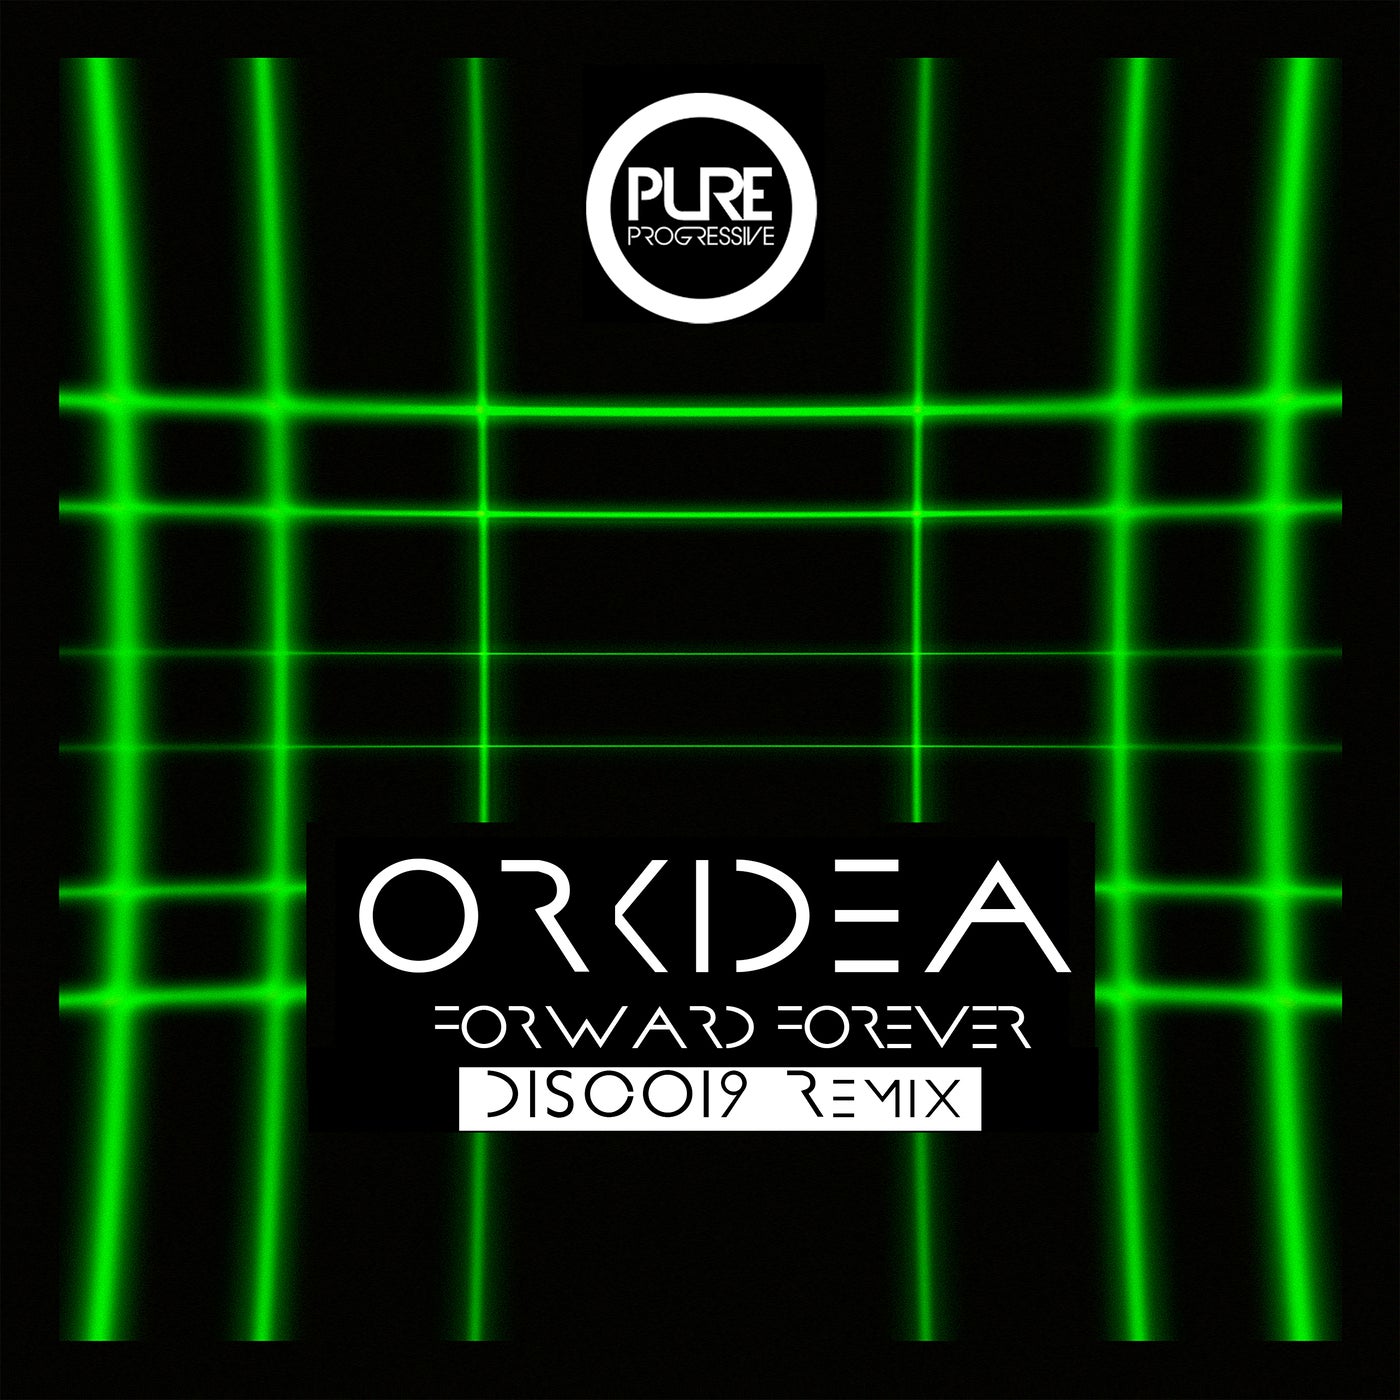 Orkidea - Forward Forever (Disco19 Extended Remix)